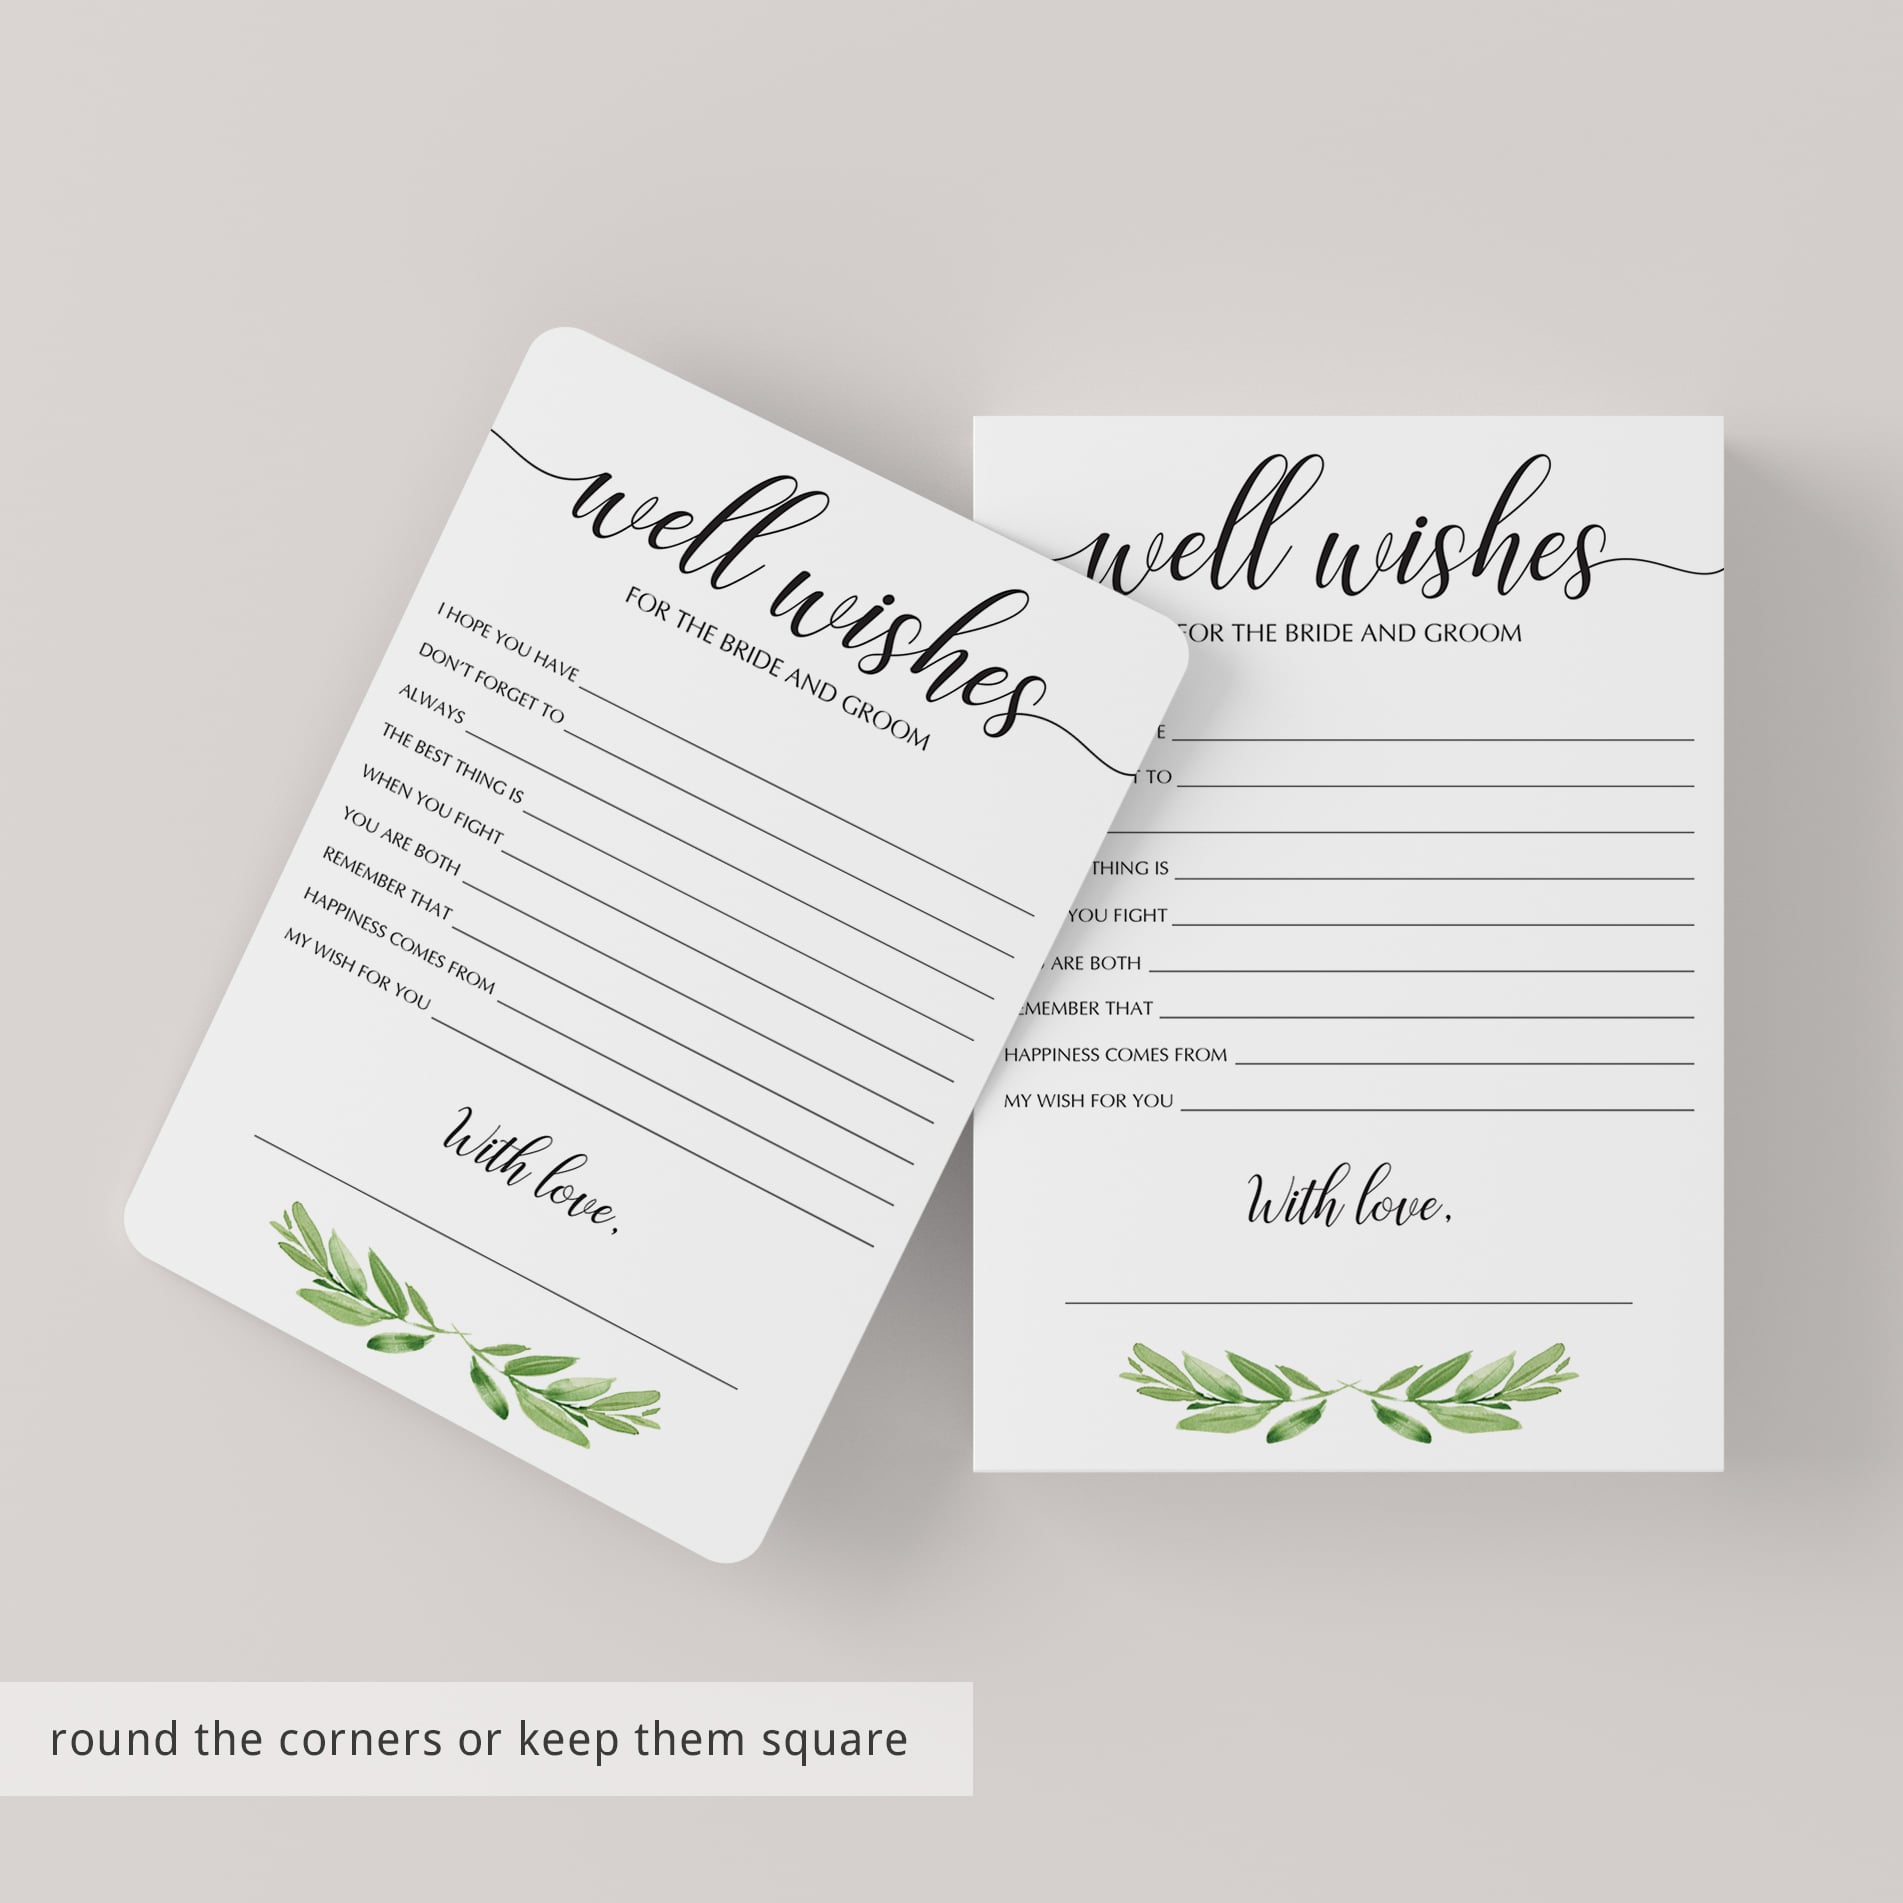 wishes for the bride and groom cards template